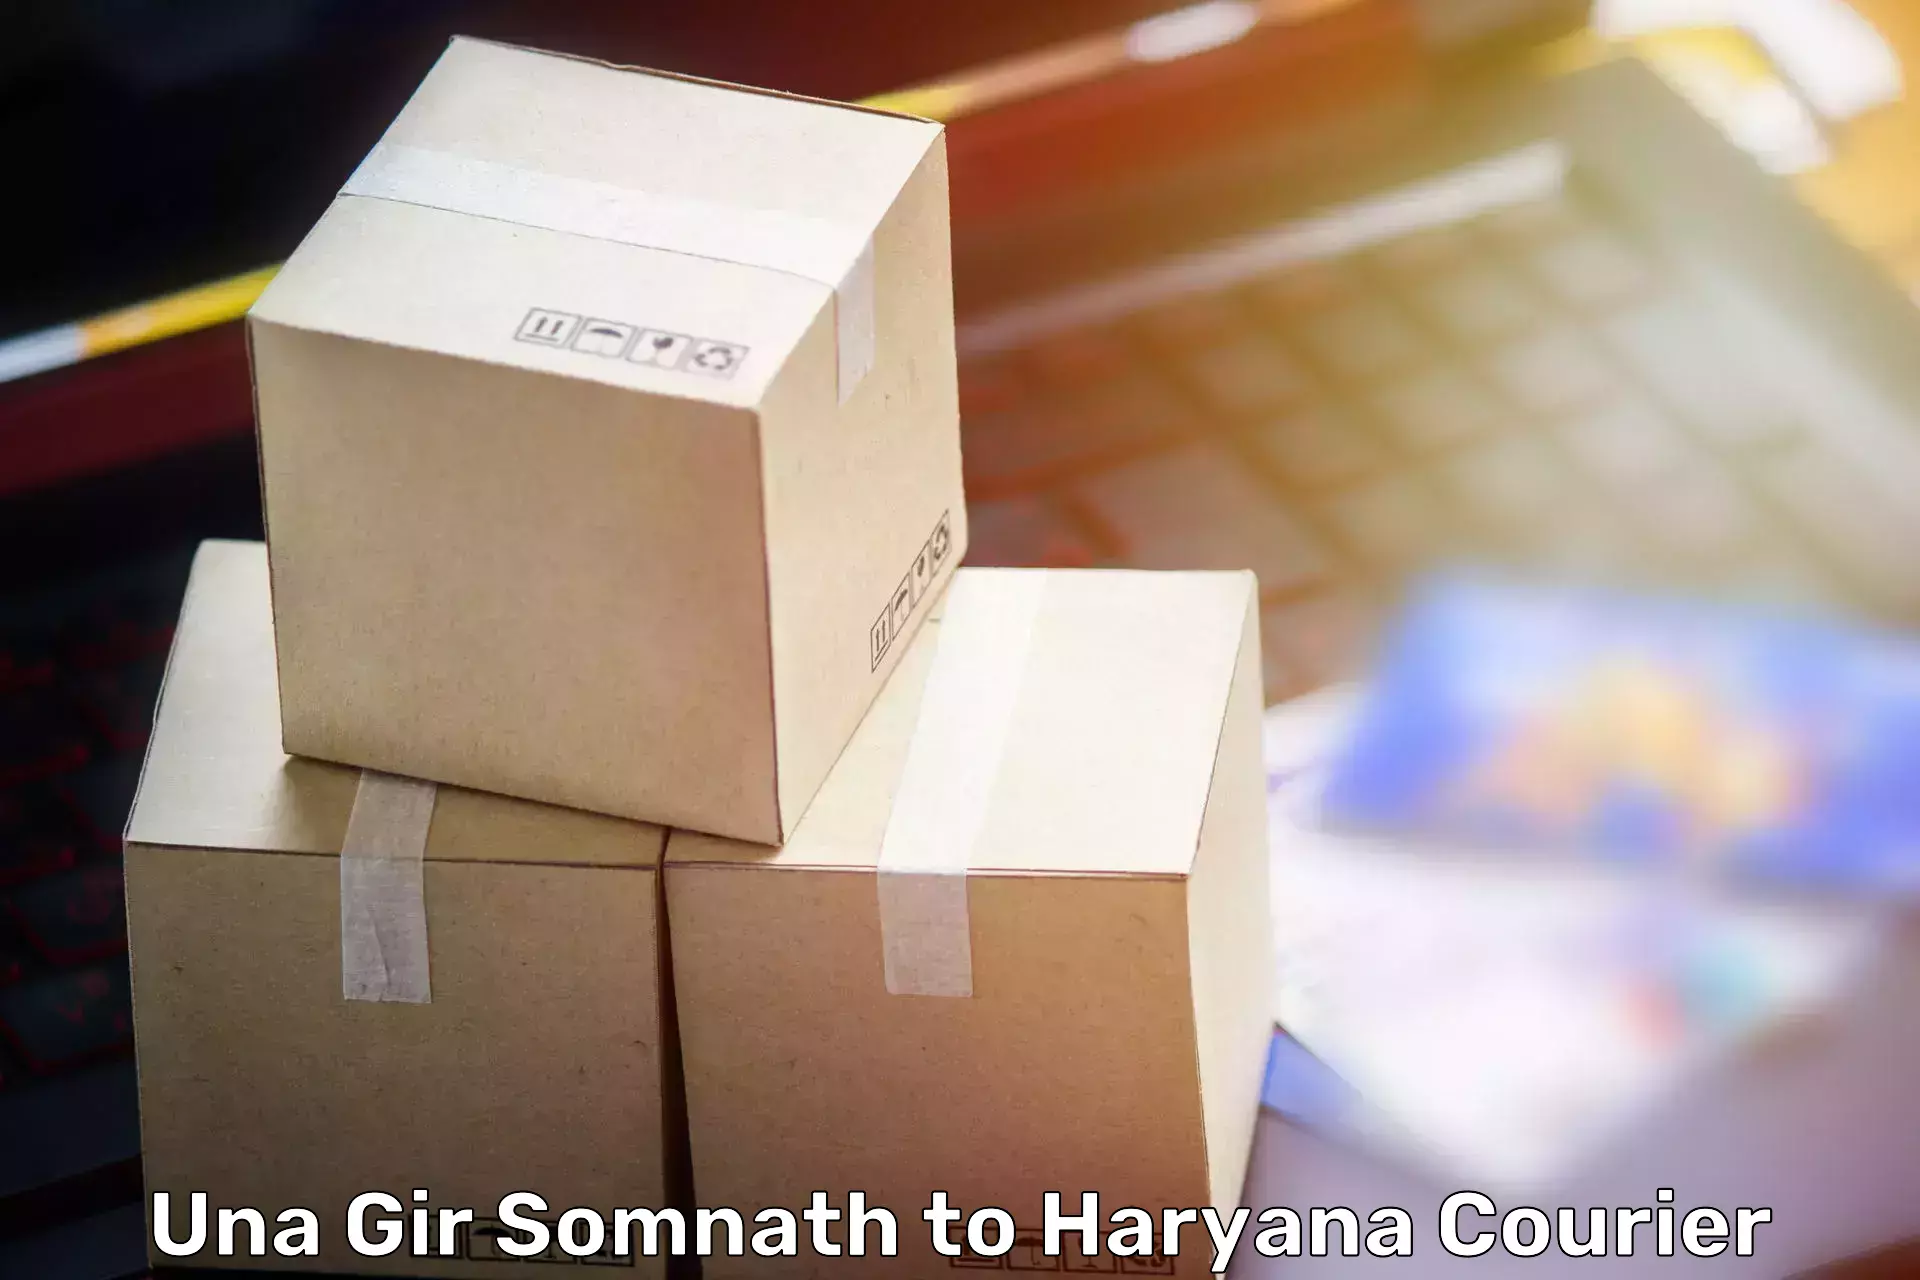 Household goods movers Una Gir Somnath to Chaudhary Charan Singh Haryana Agricultural University Hisar